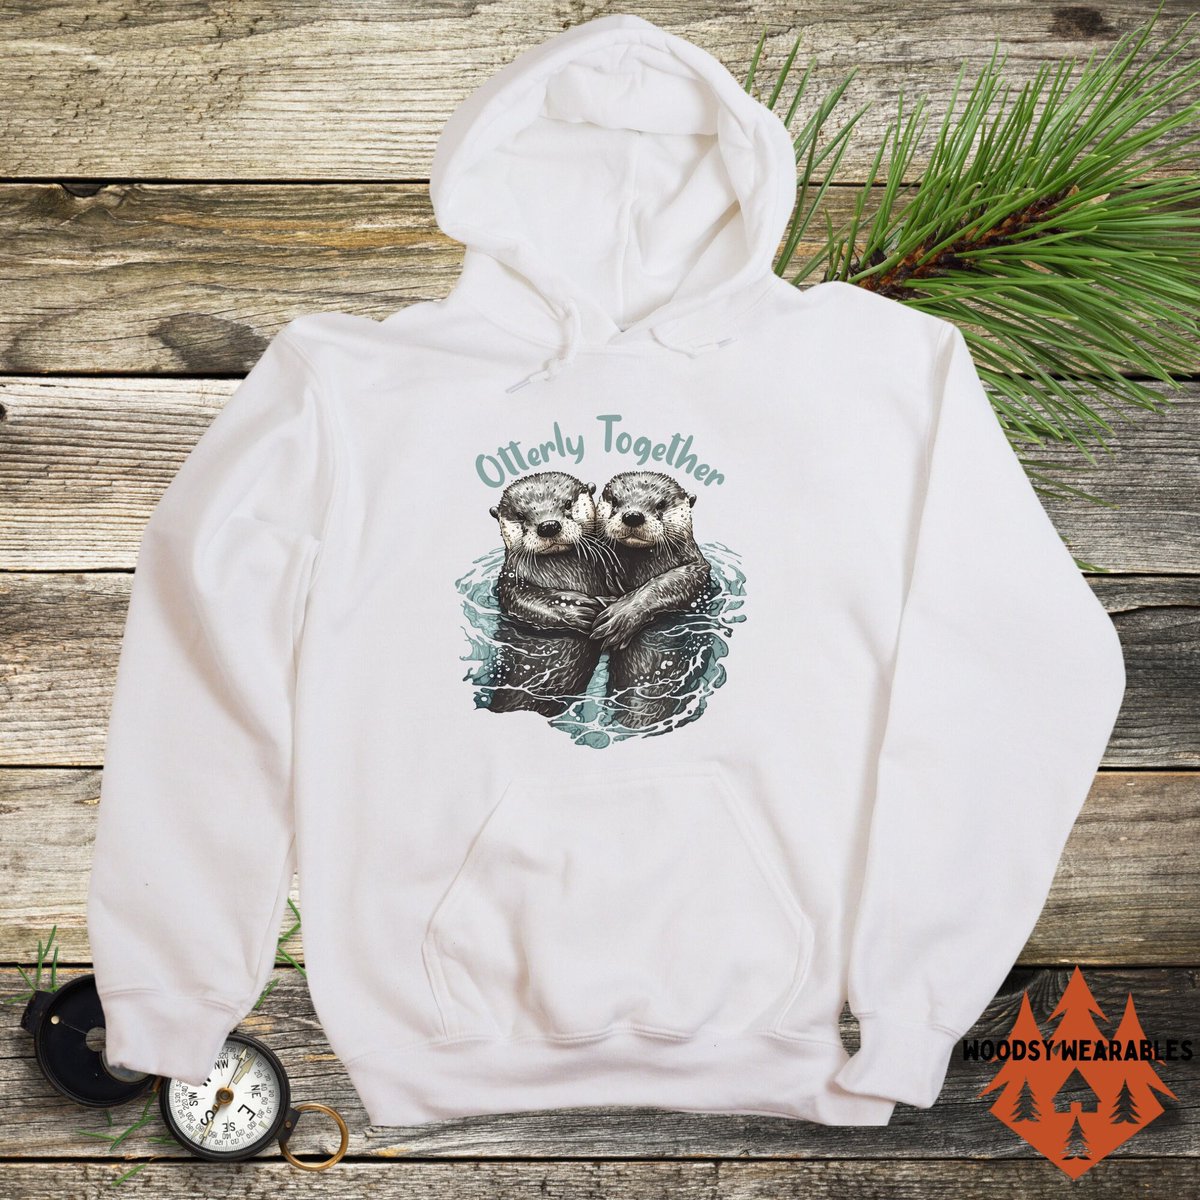 Excited to share the latest addition to my #etsy shop: Otter Hoodie | Cute Otter Hoodie | Otterly Together etsy.me/46BnKBh #white #gray #pullover #otterlovergifts #otter #wildlifeclothing #funnyottershirt #animalenthusiast #giftforher